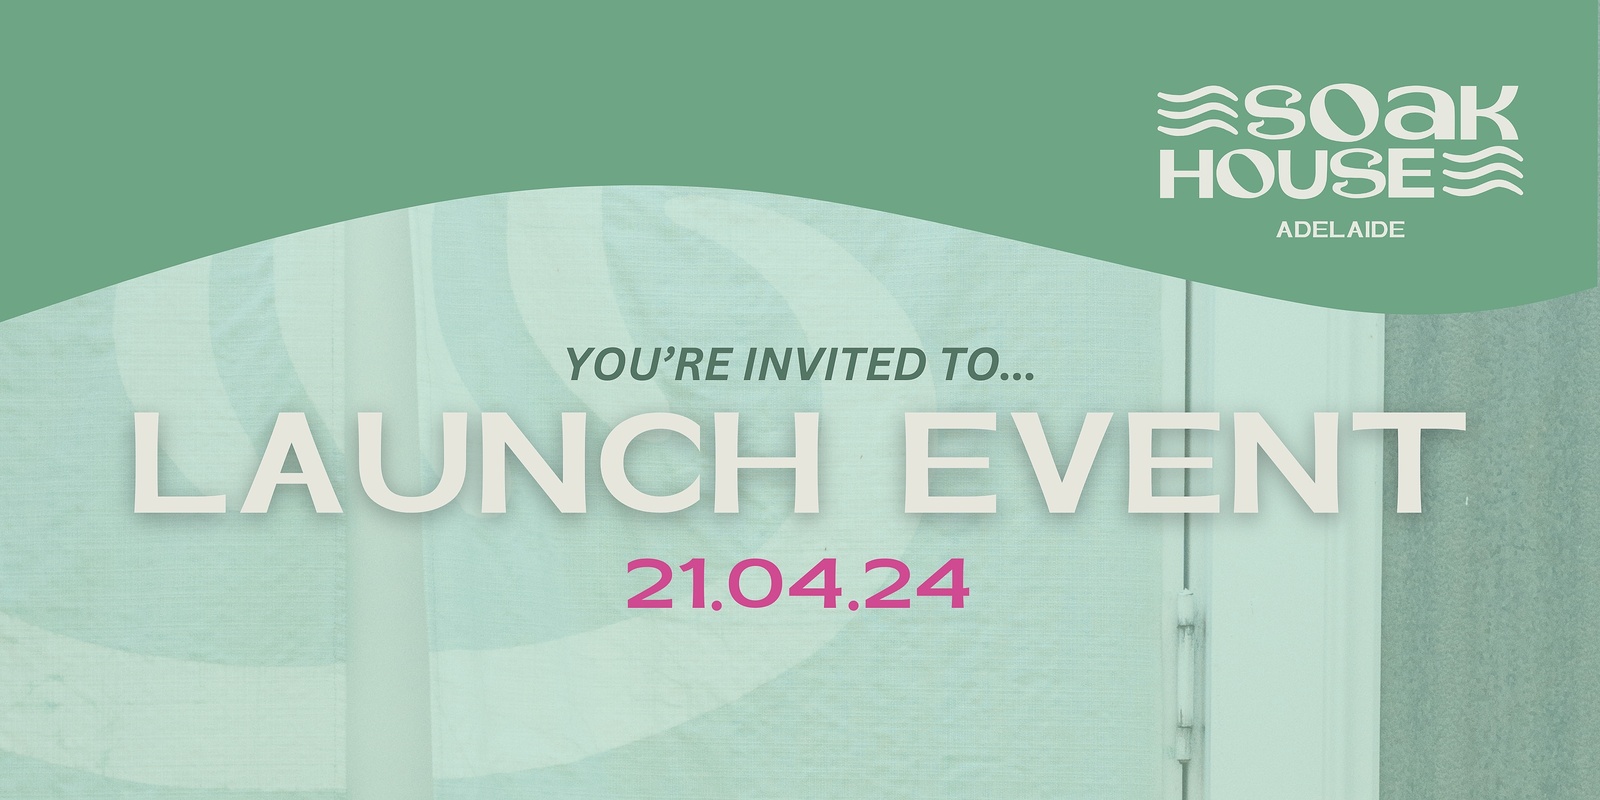 Banner image for Soak House Adelaide LAUNCH EVENT